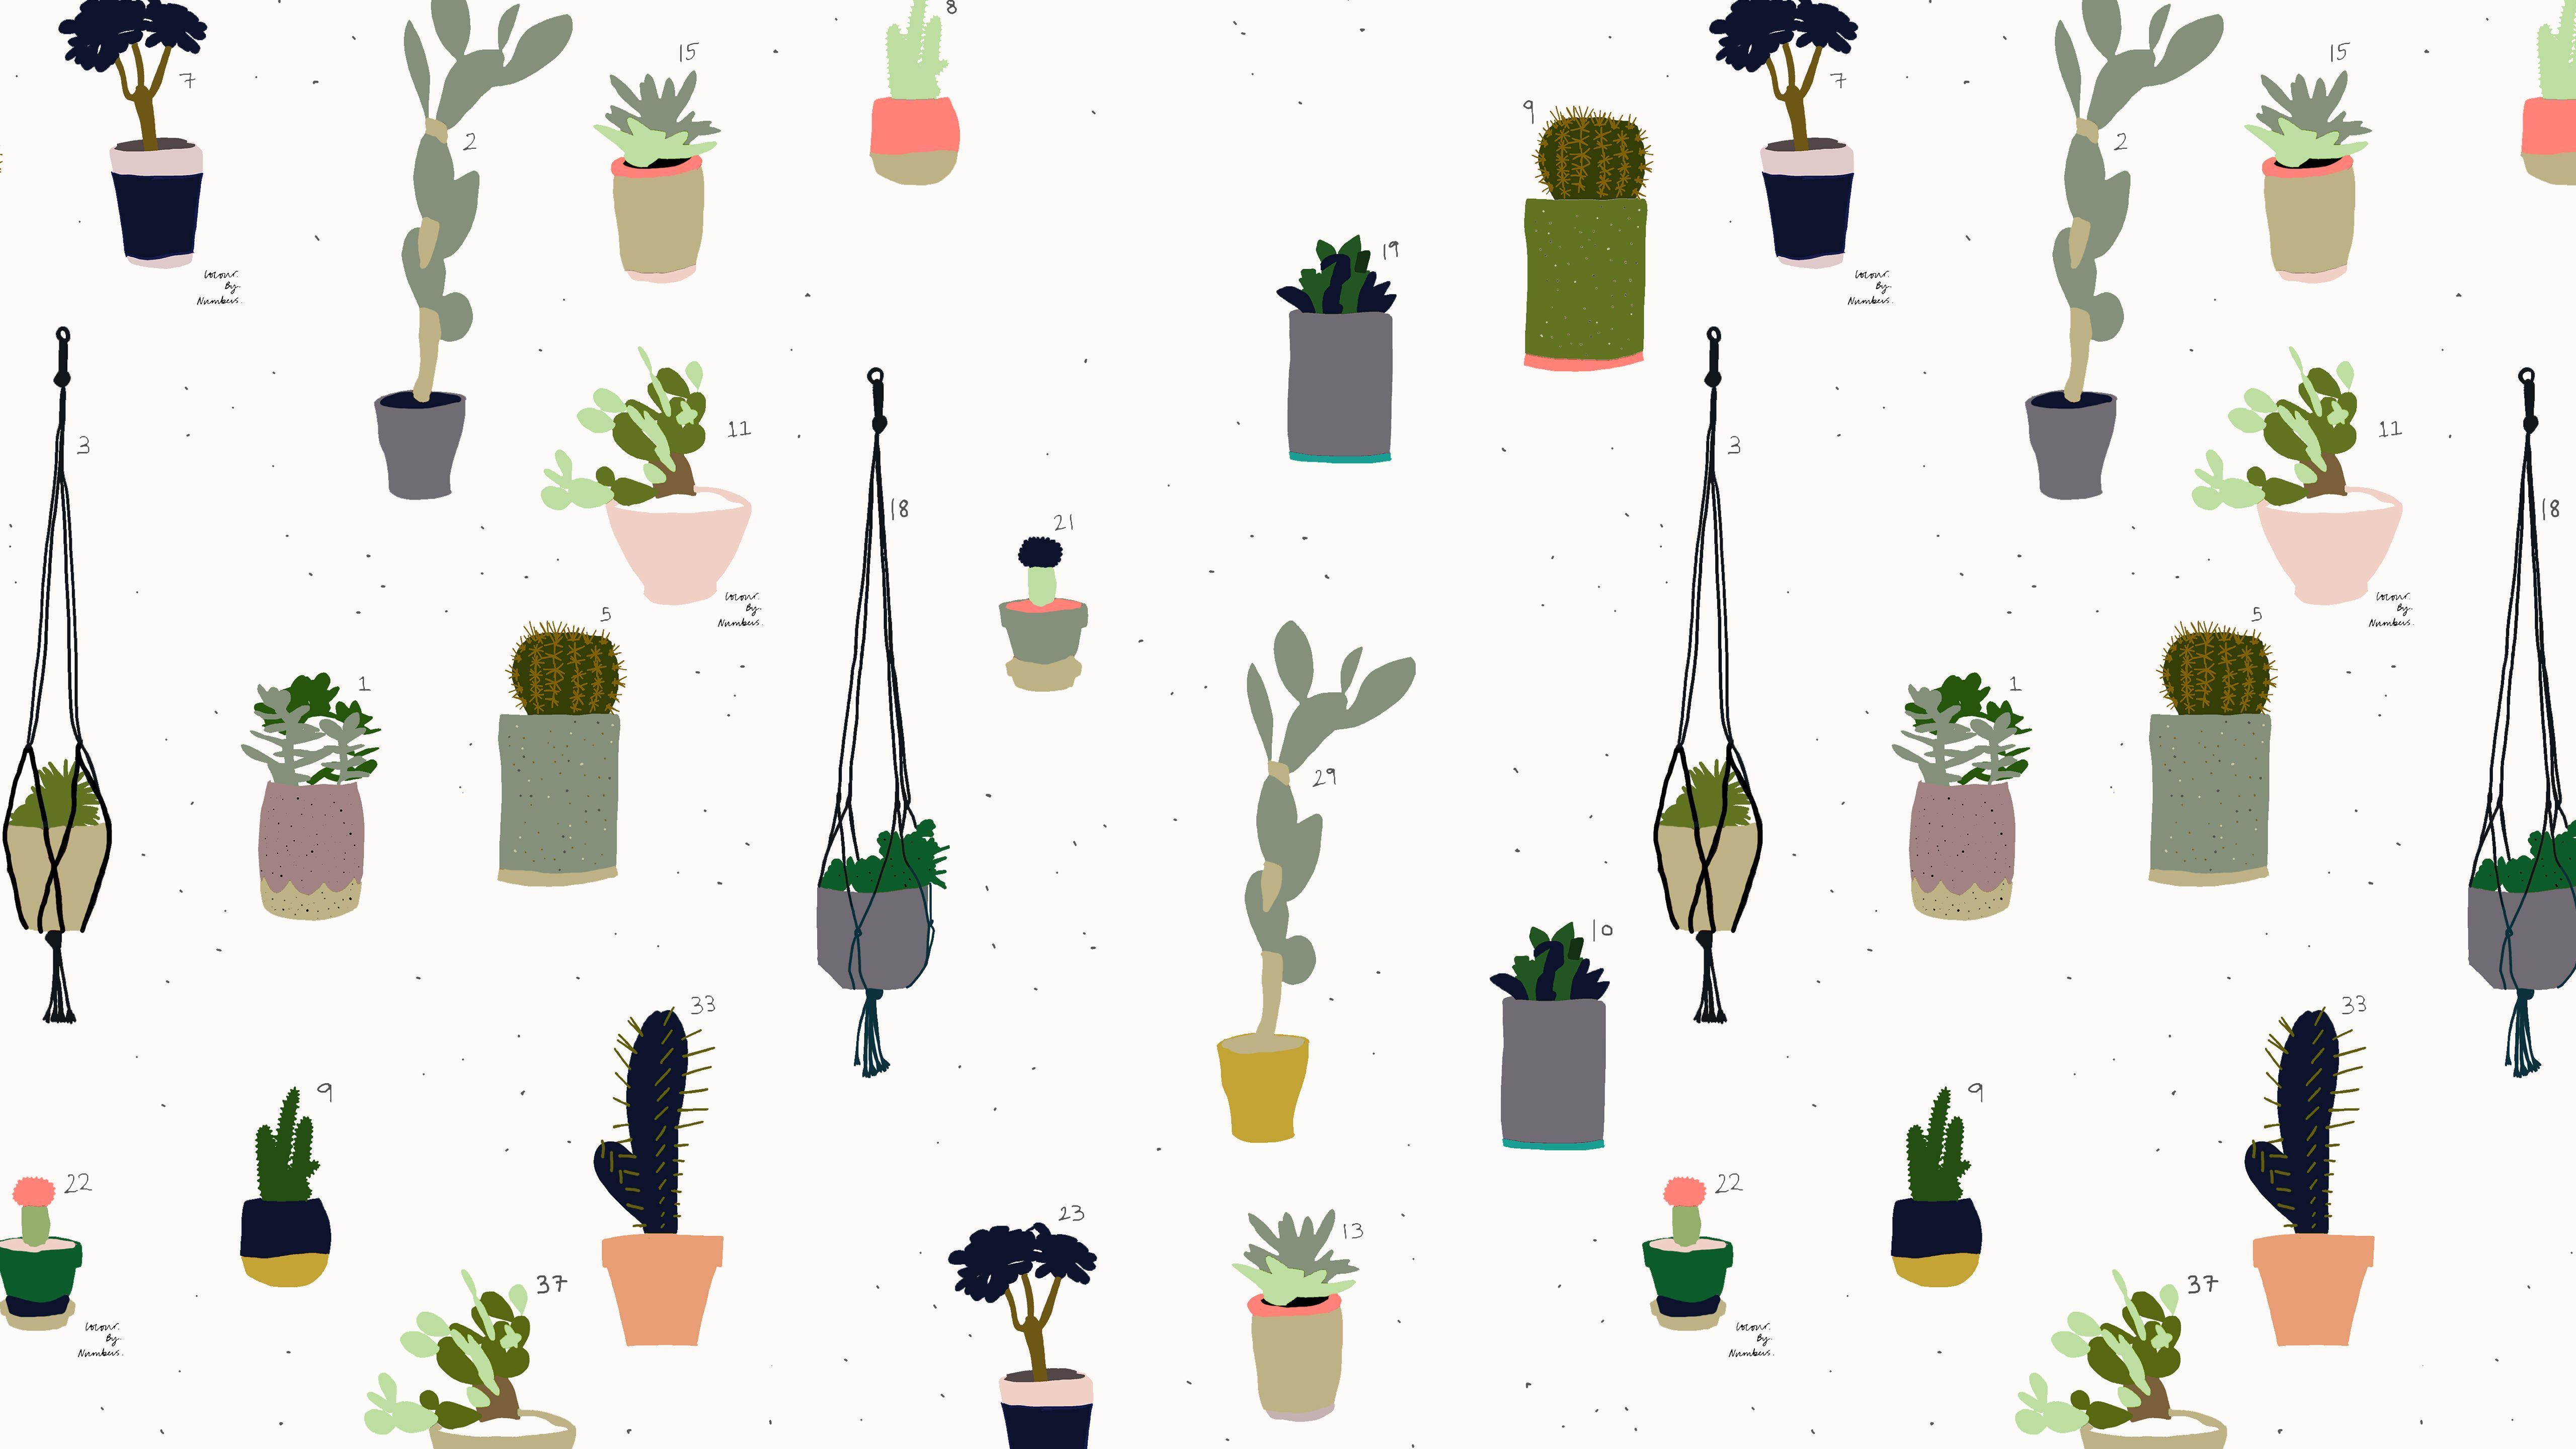 A pattern of various potted plants, some of which are hanging. - Succulent, cactus